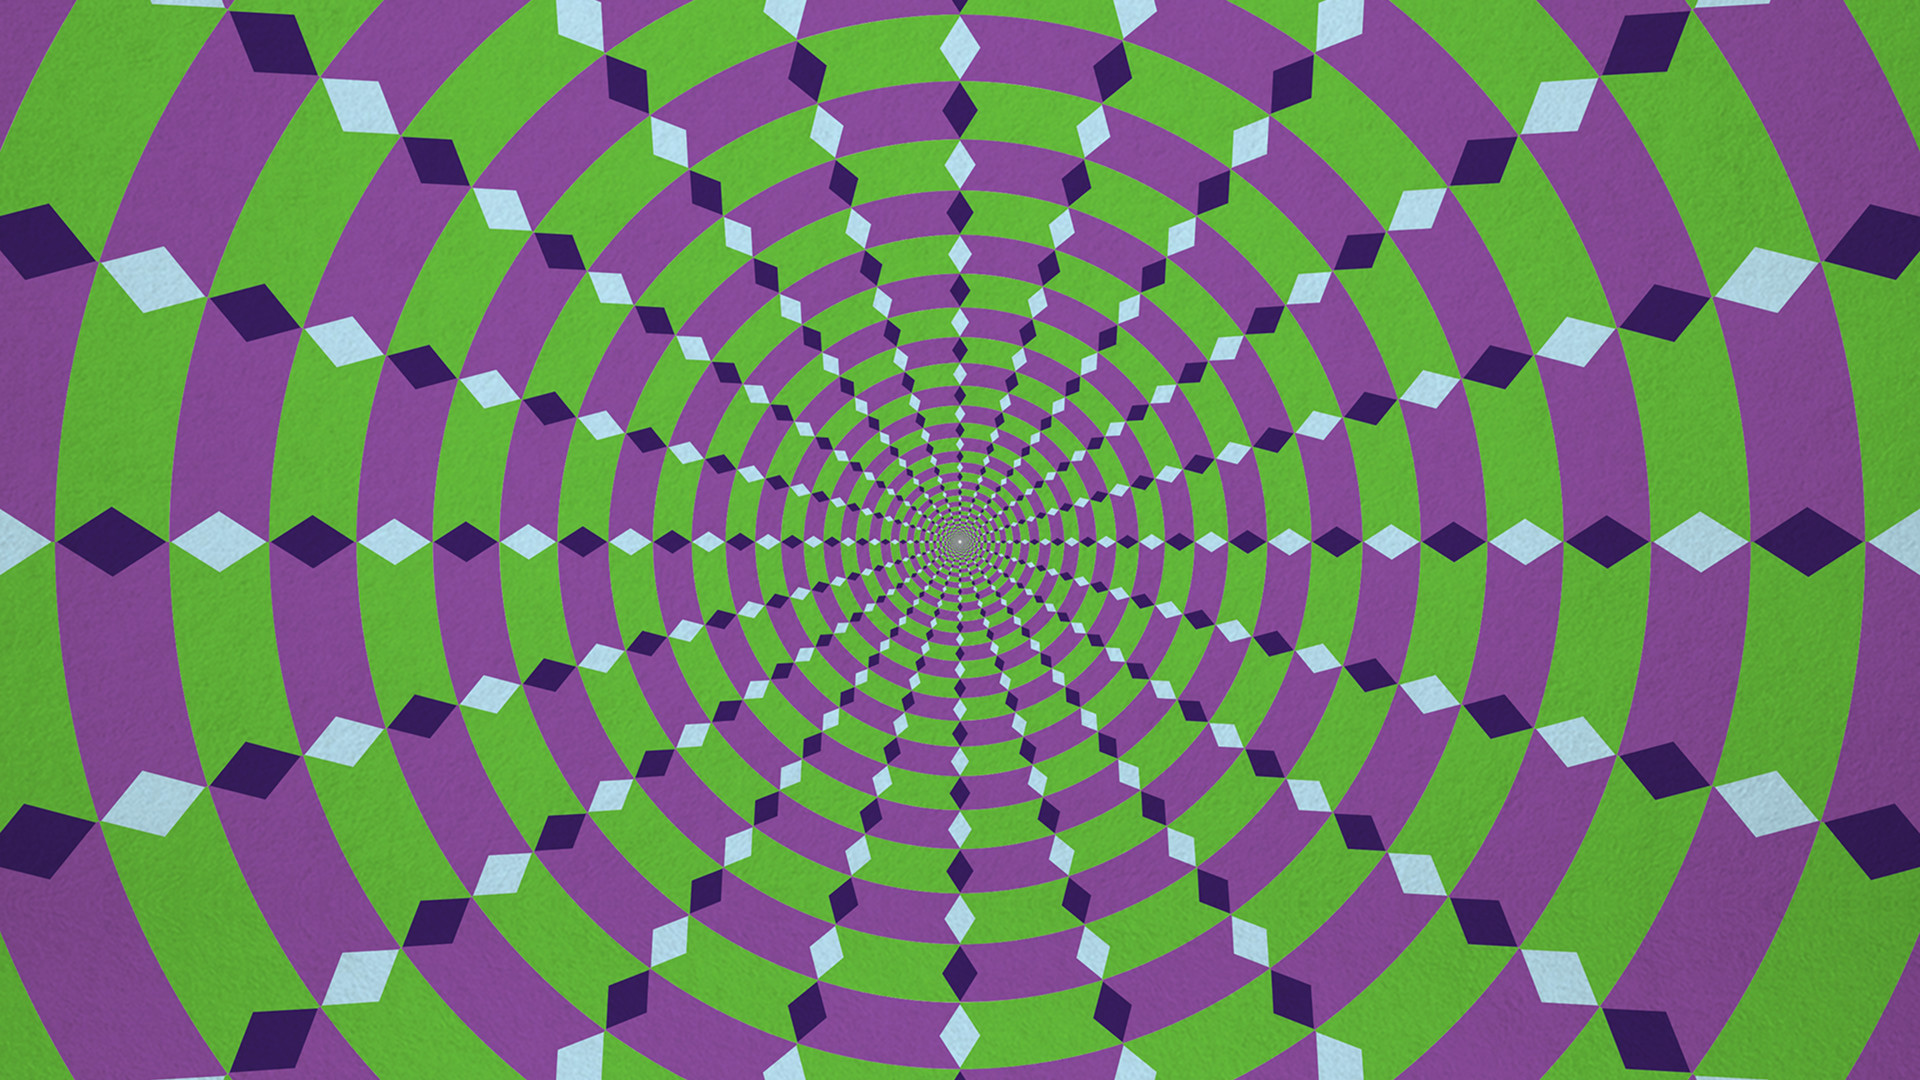 1920x1080 Includes famous optical illusions like the Hermann Grid, the cafÃ© wall  illusion, Fraser's Spiral, motion illusions and more!